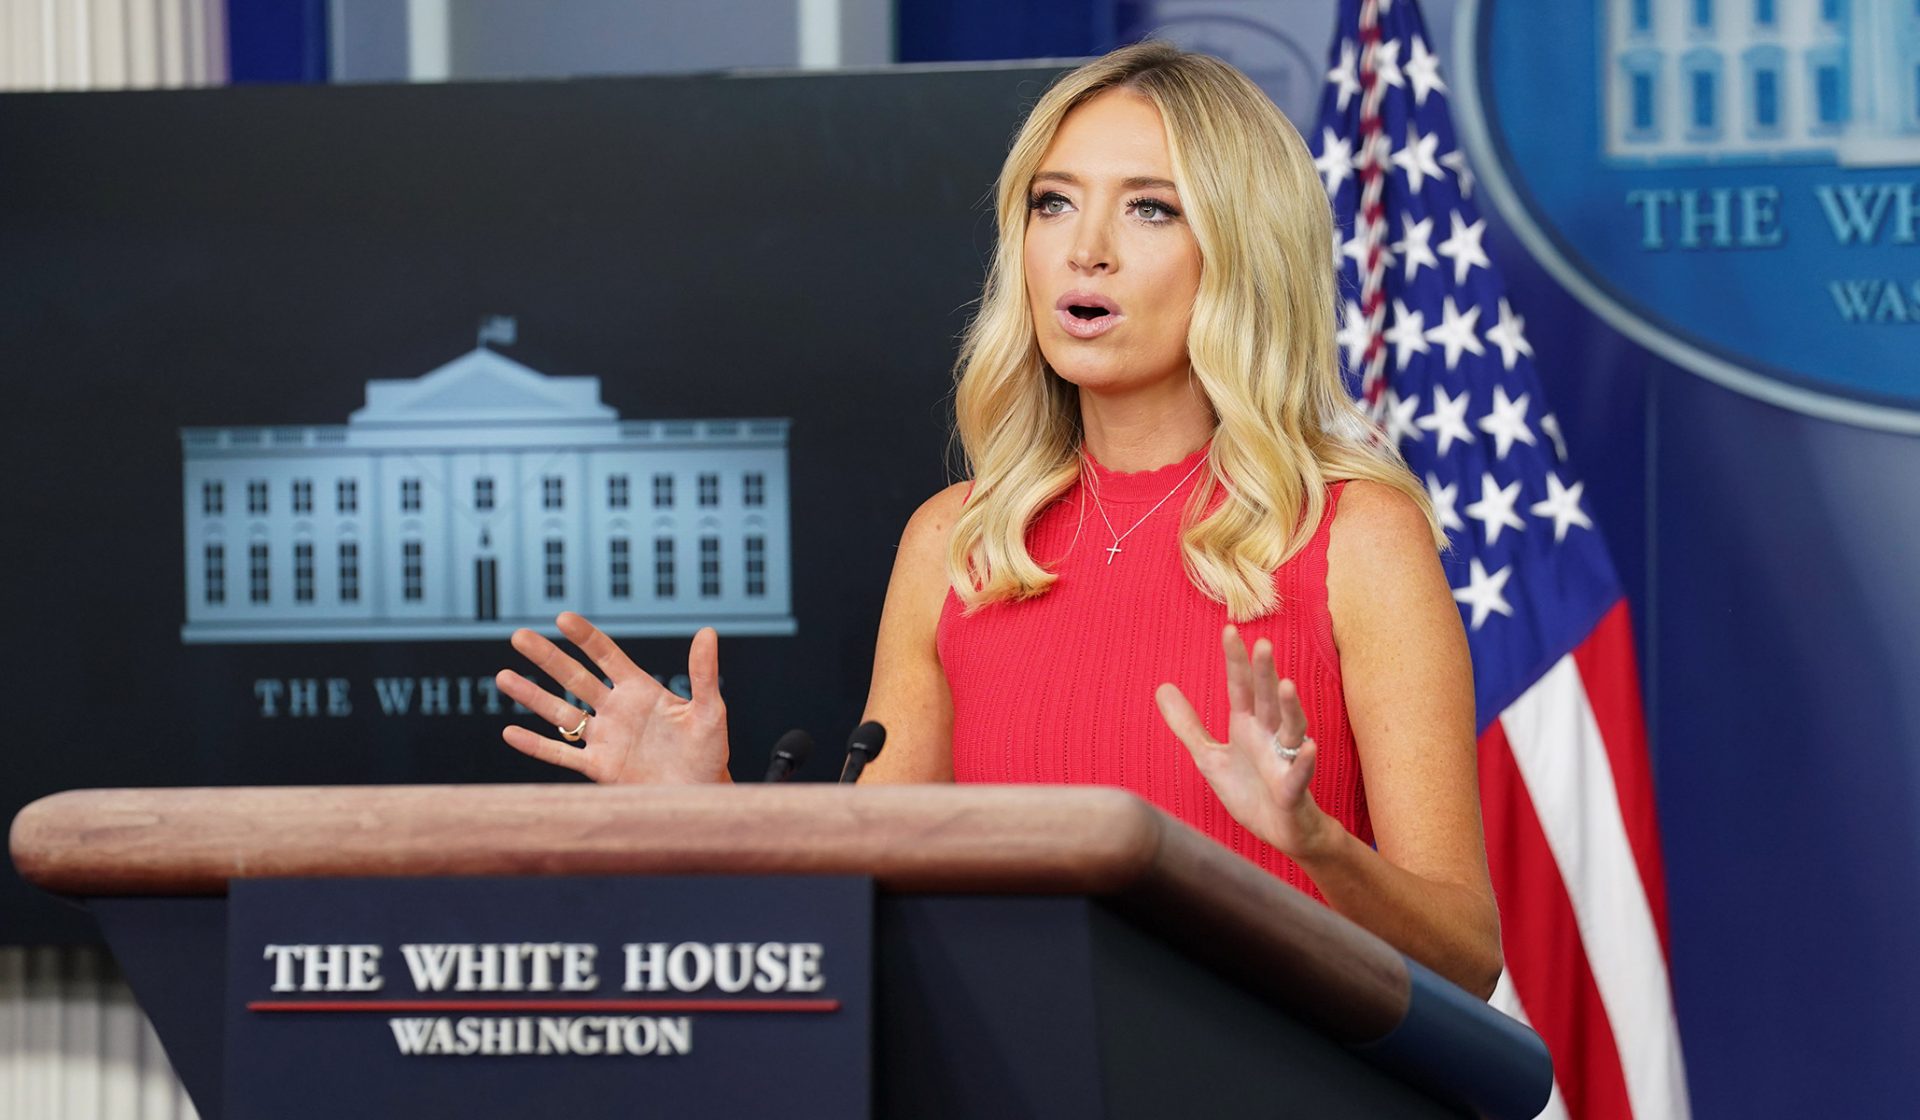 McEnany Reiterates Qualified-Immunity Reform Is a ‘Non-Starter’